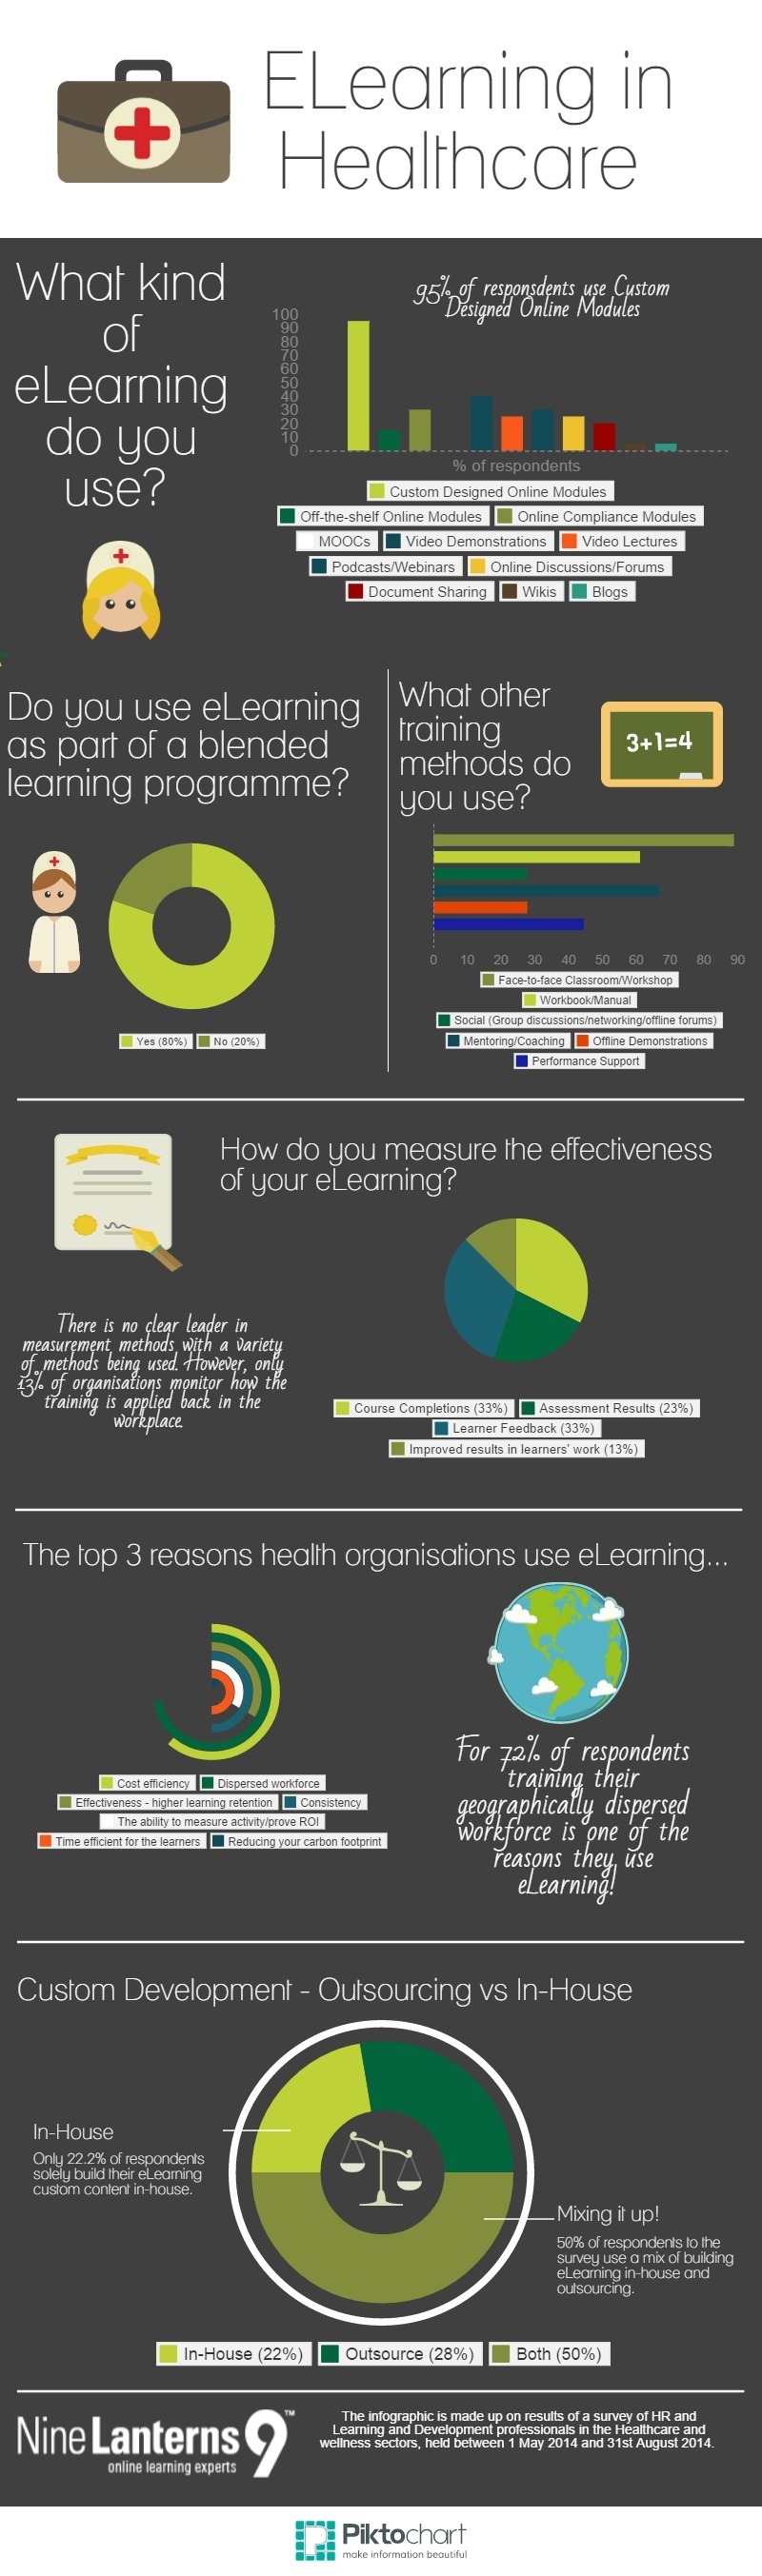 ELearning in Healthcare Infographic